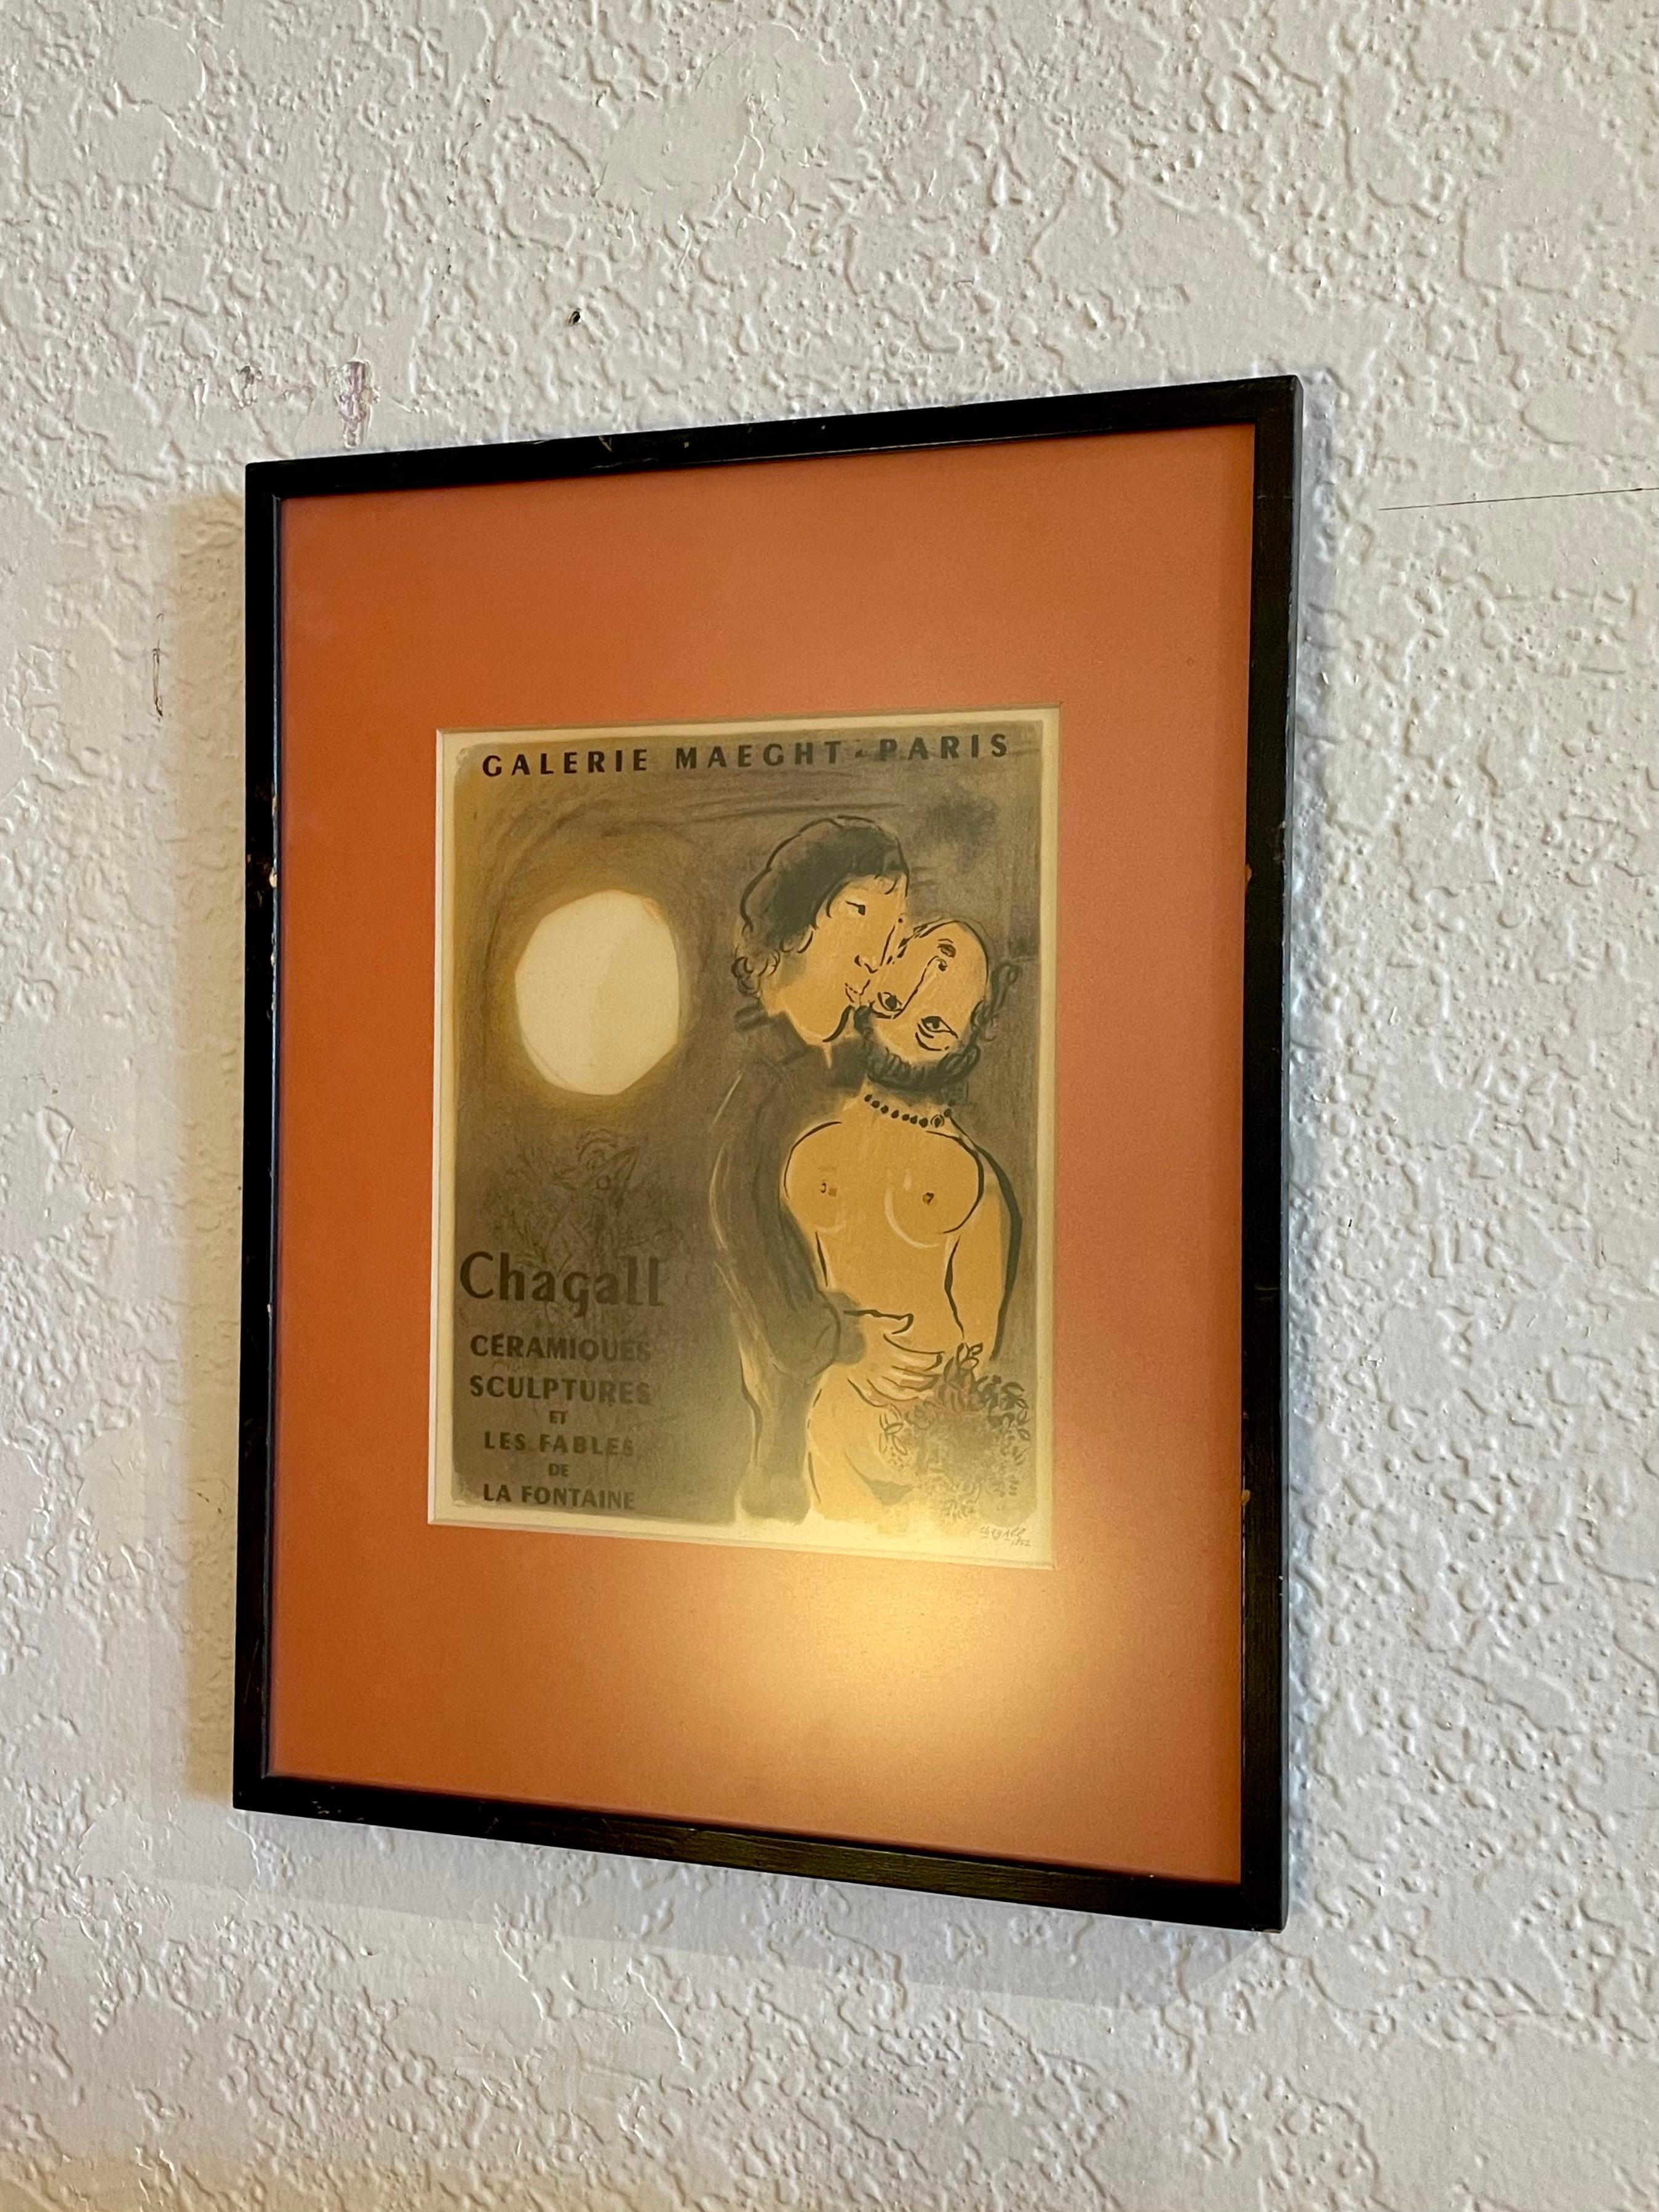 Mid-Century Modern Midcentury Marc Chagall Galerie Maeght, Paris Lithograph Exhibition Poster